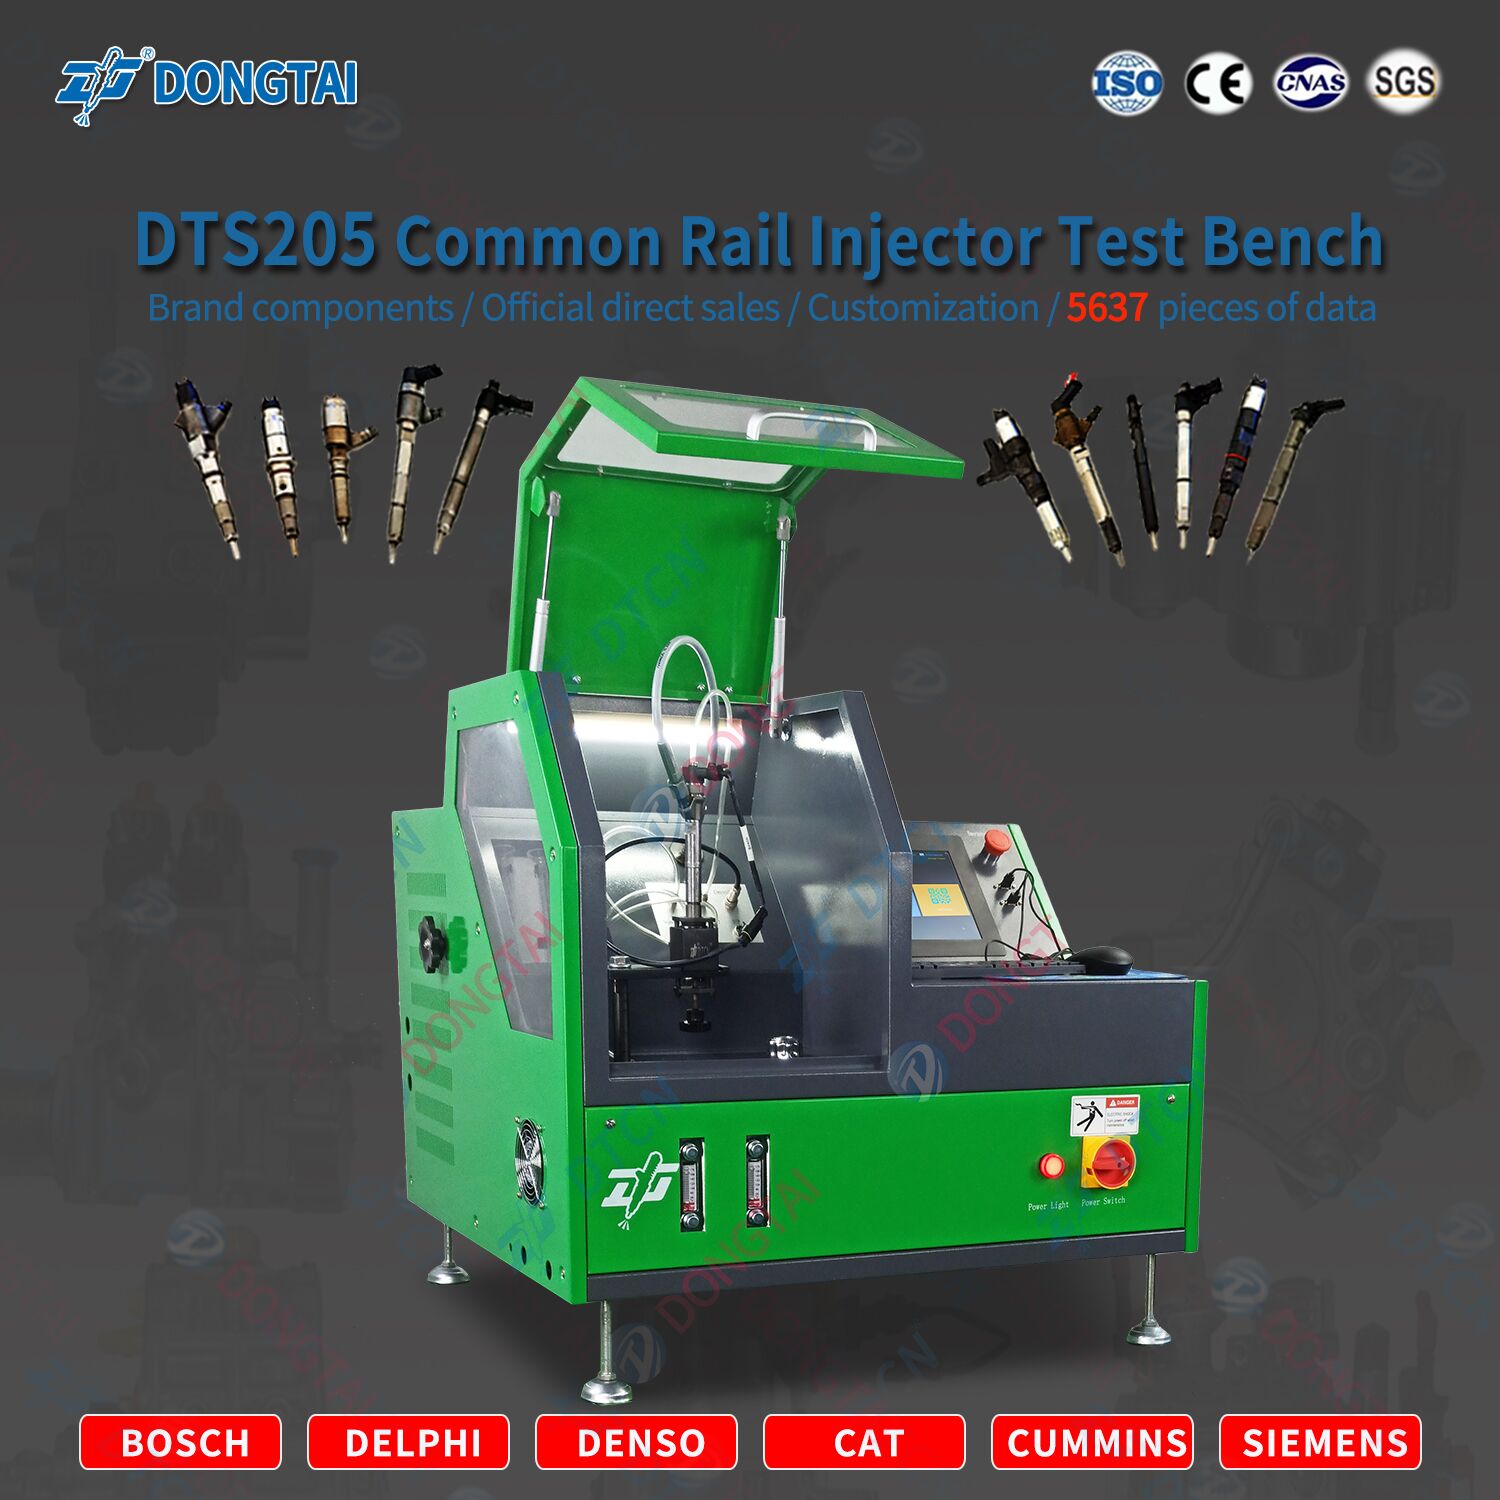 DTS205 Common Rail Injector  Test  Bench Featured Image